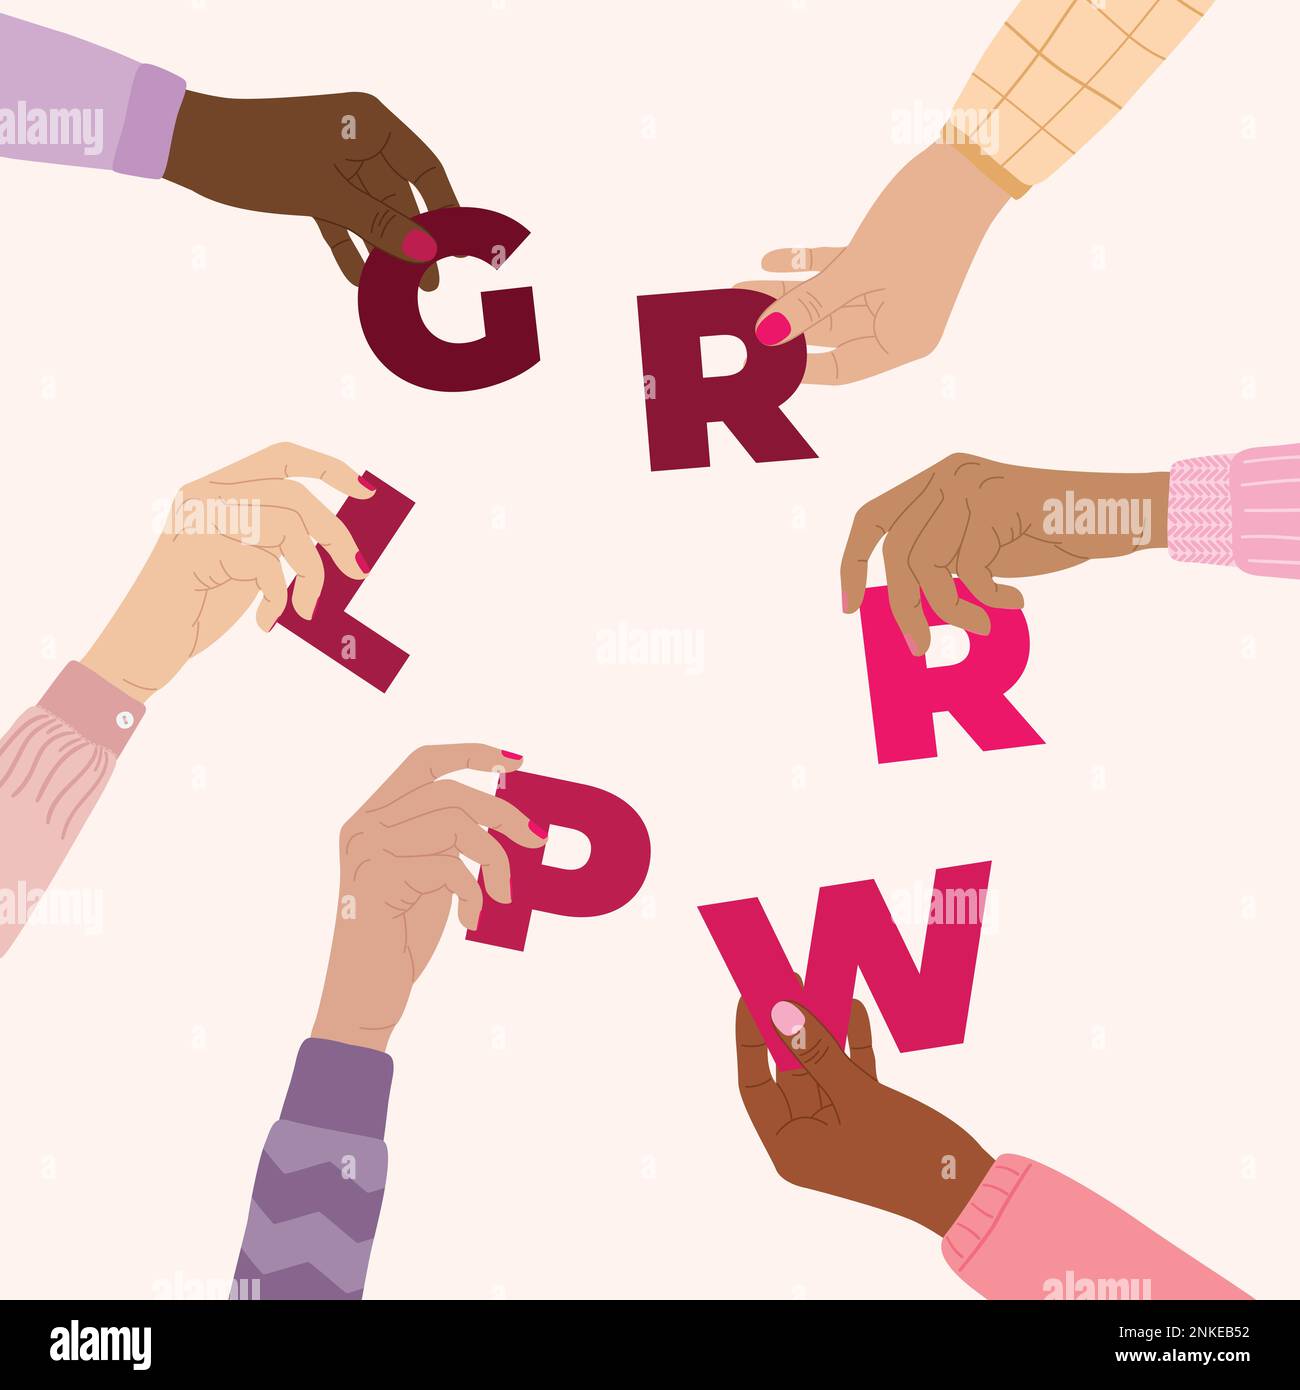 Girl power poster. Female hands hold world grl pwr. Woman empowerment, girl power, fight for gender equality, feminism and sisterhood concept. Hand dr Stock Vector